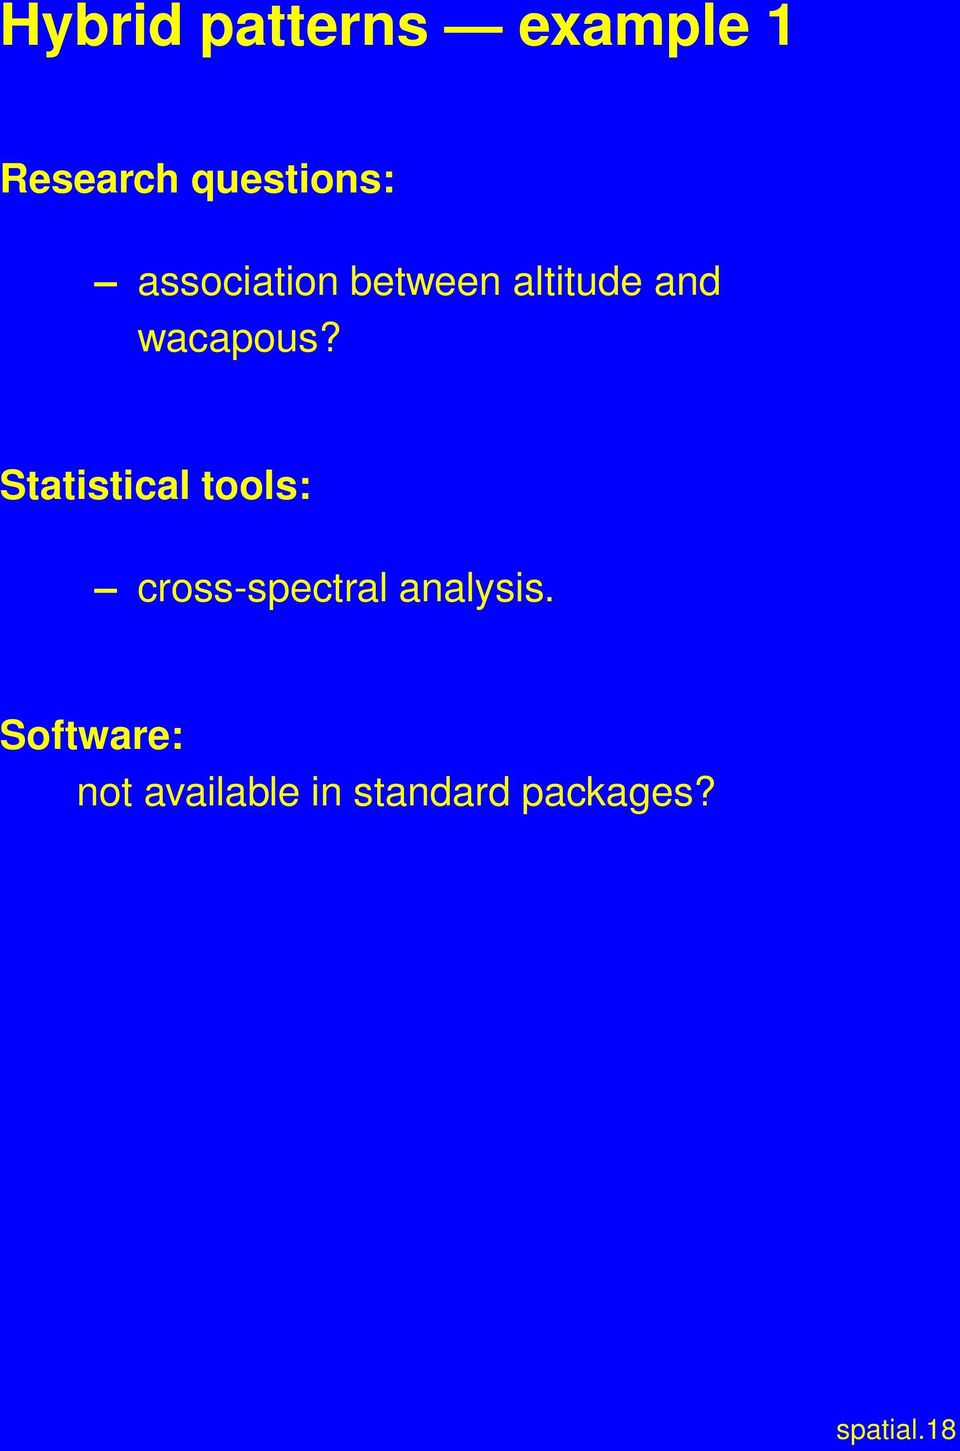 Statistical tools: cross-spectral analysis.